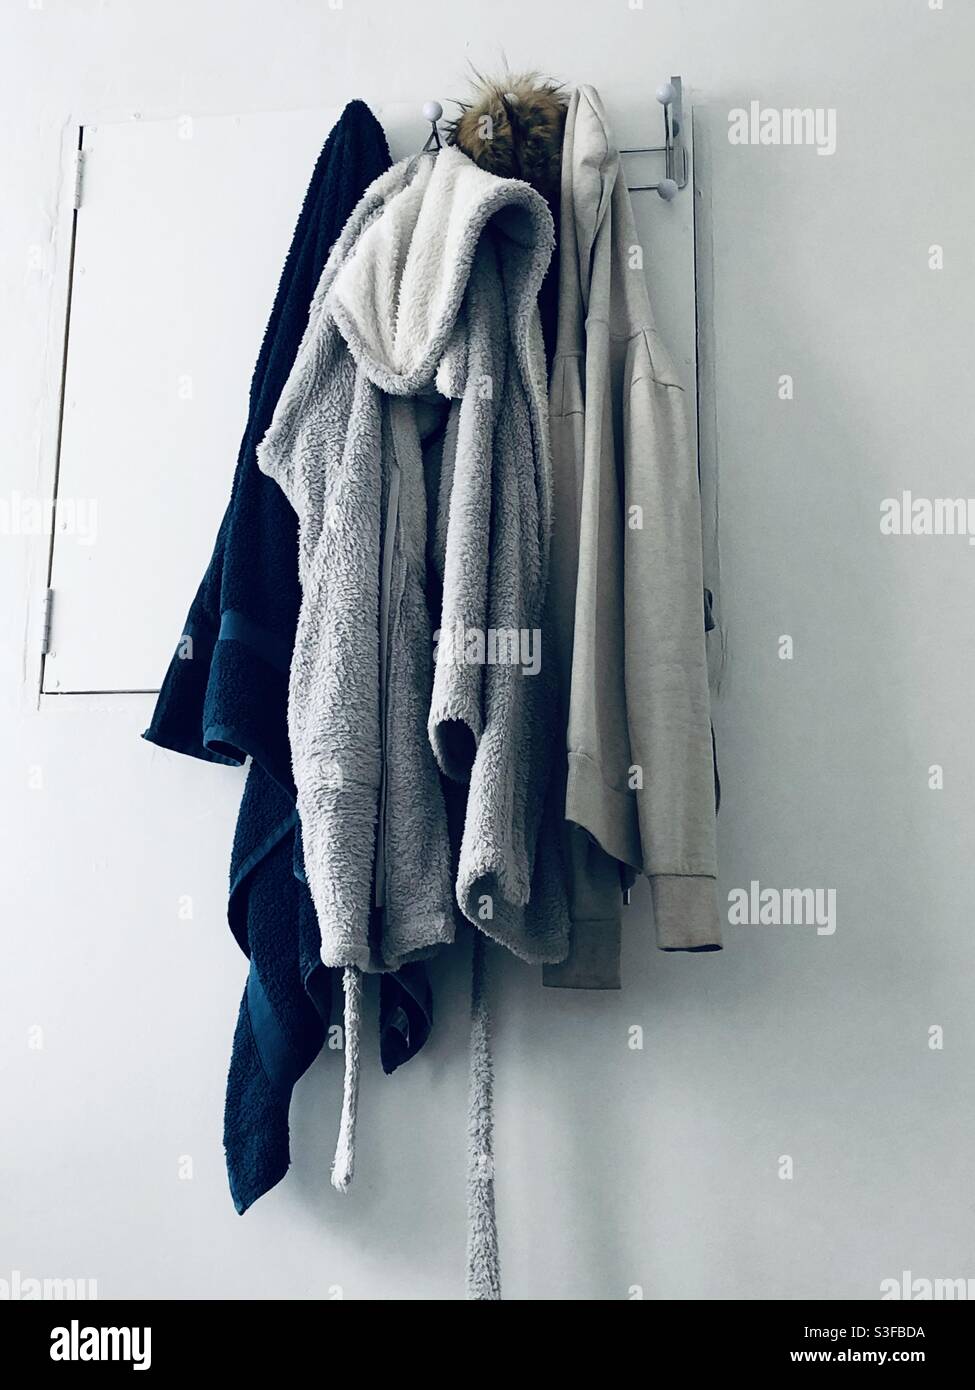 Towel, dressing gown, jackets hanging up Stock Photo